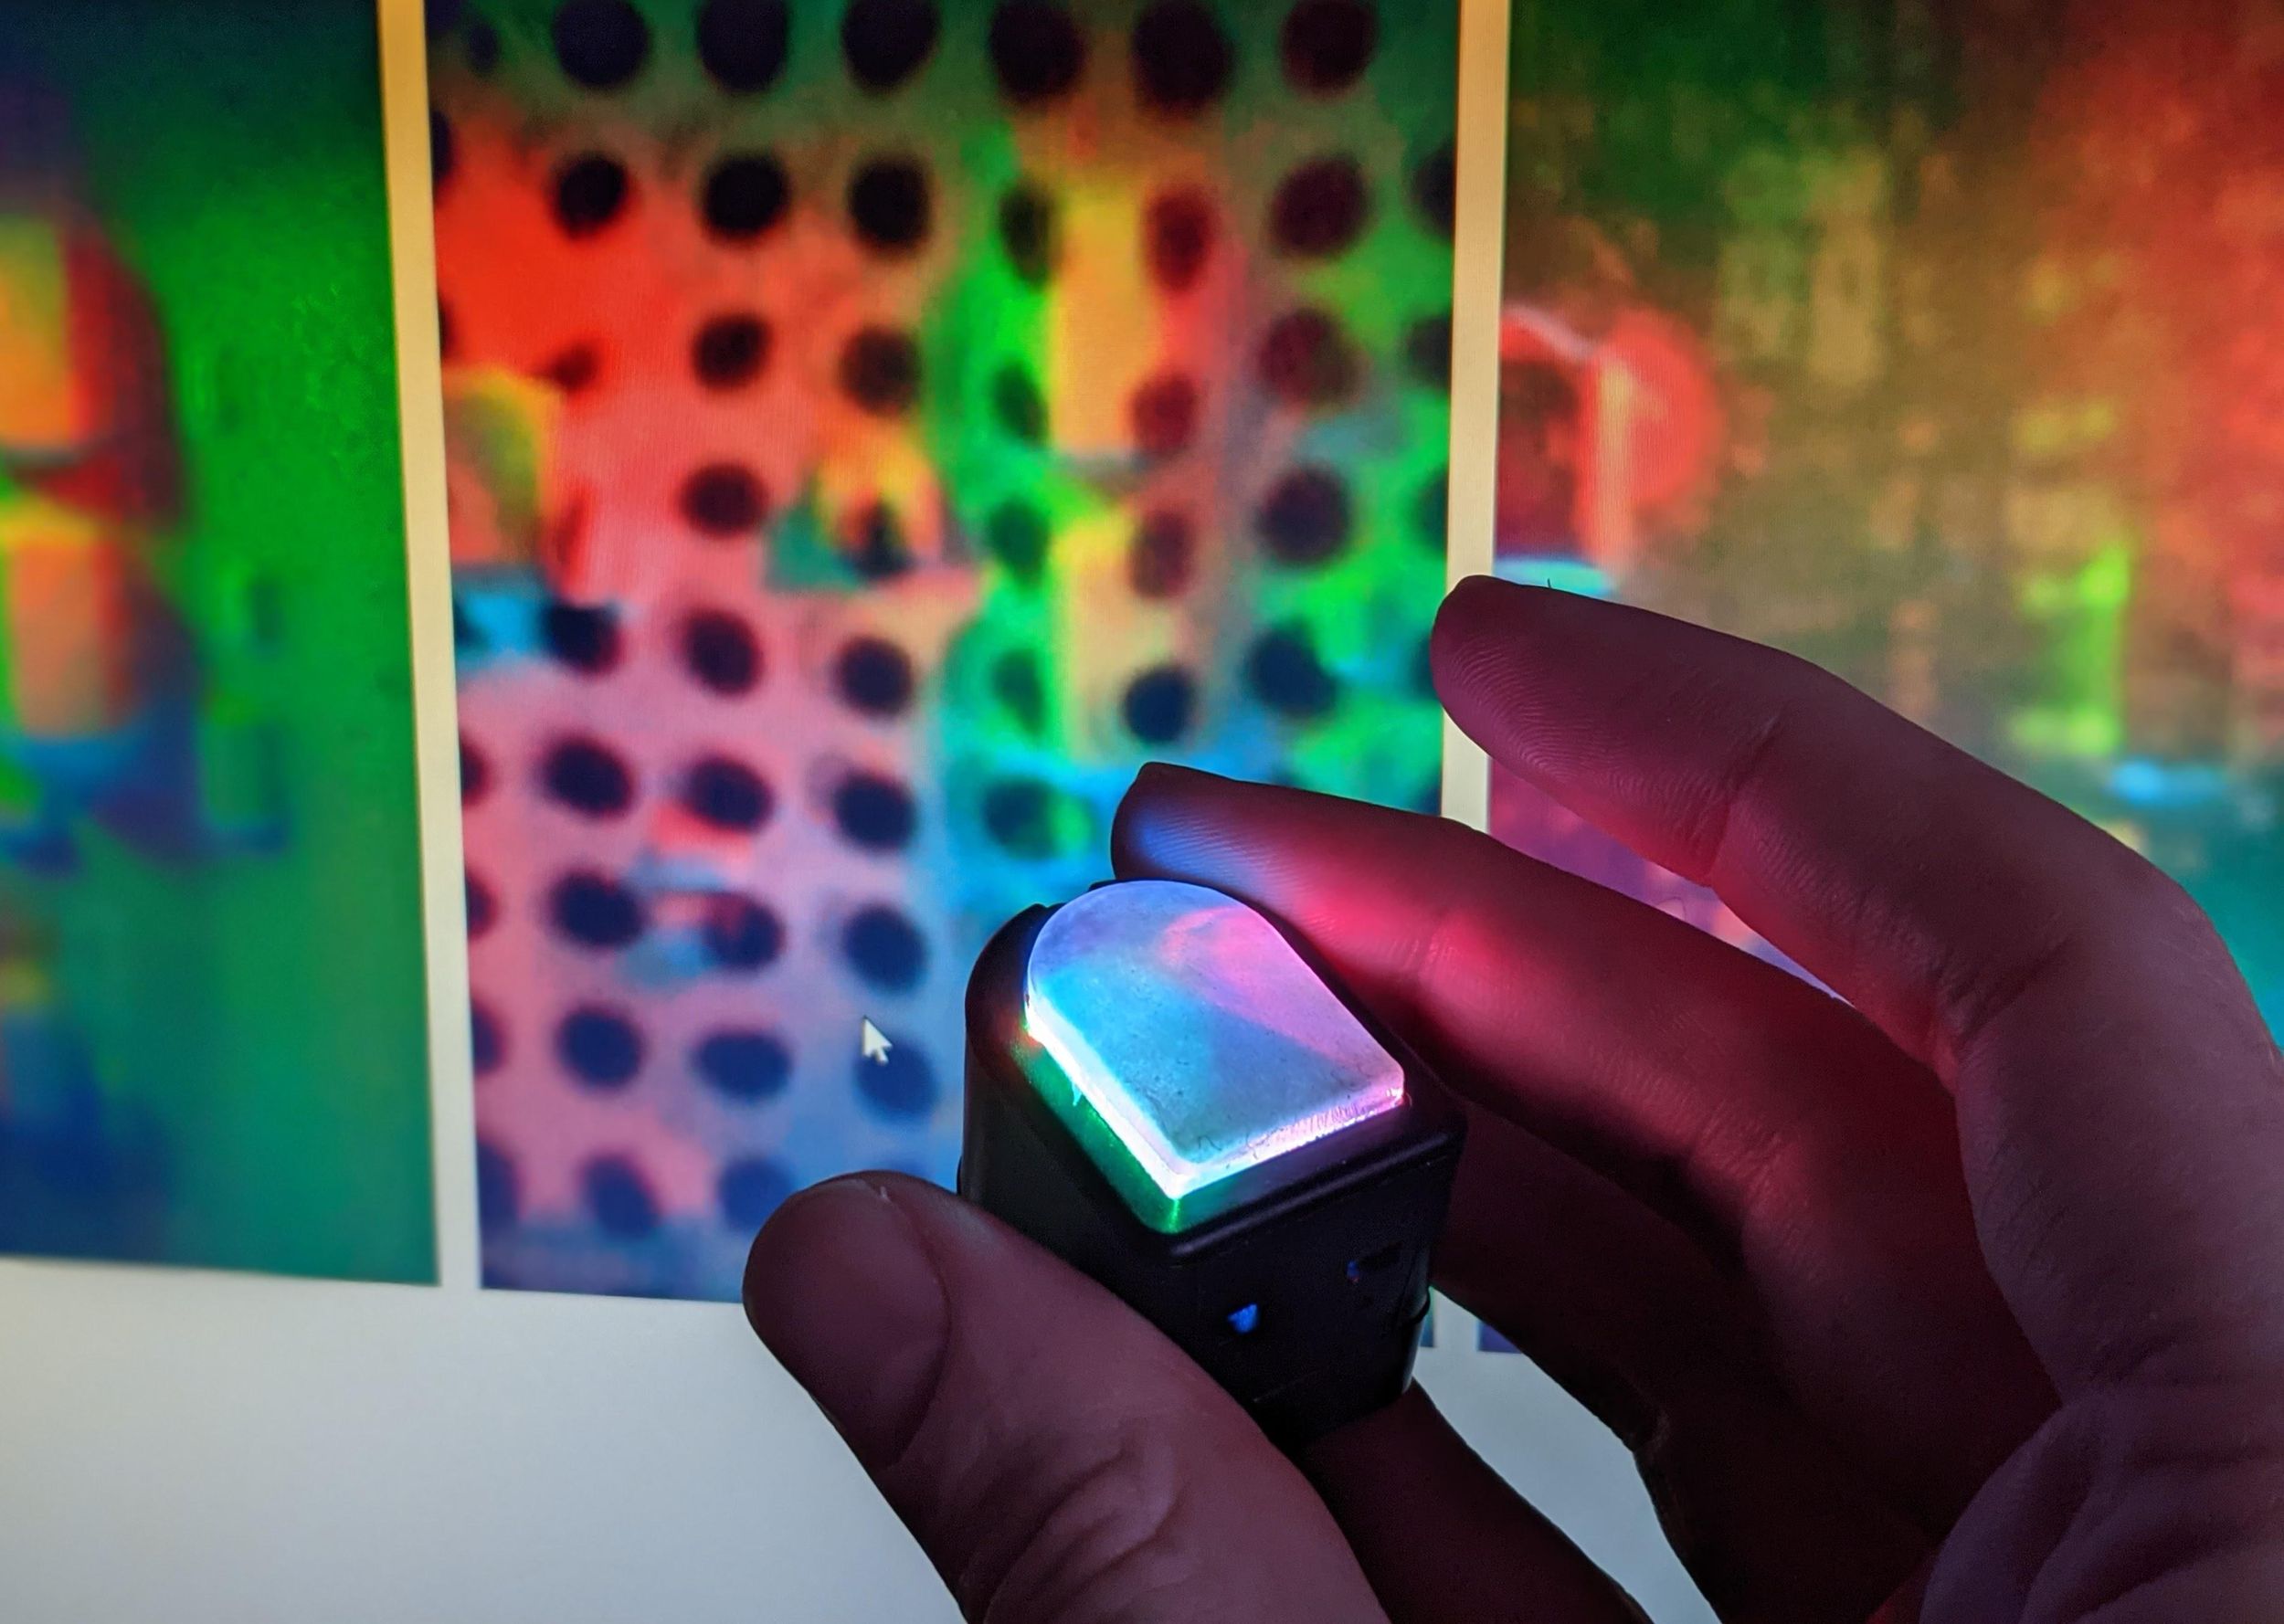 A fingertip-sized tactile sensor glowing with red, blue, and green LEDs held between finger and thumb